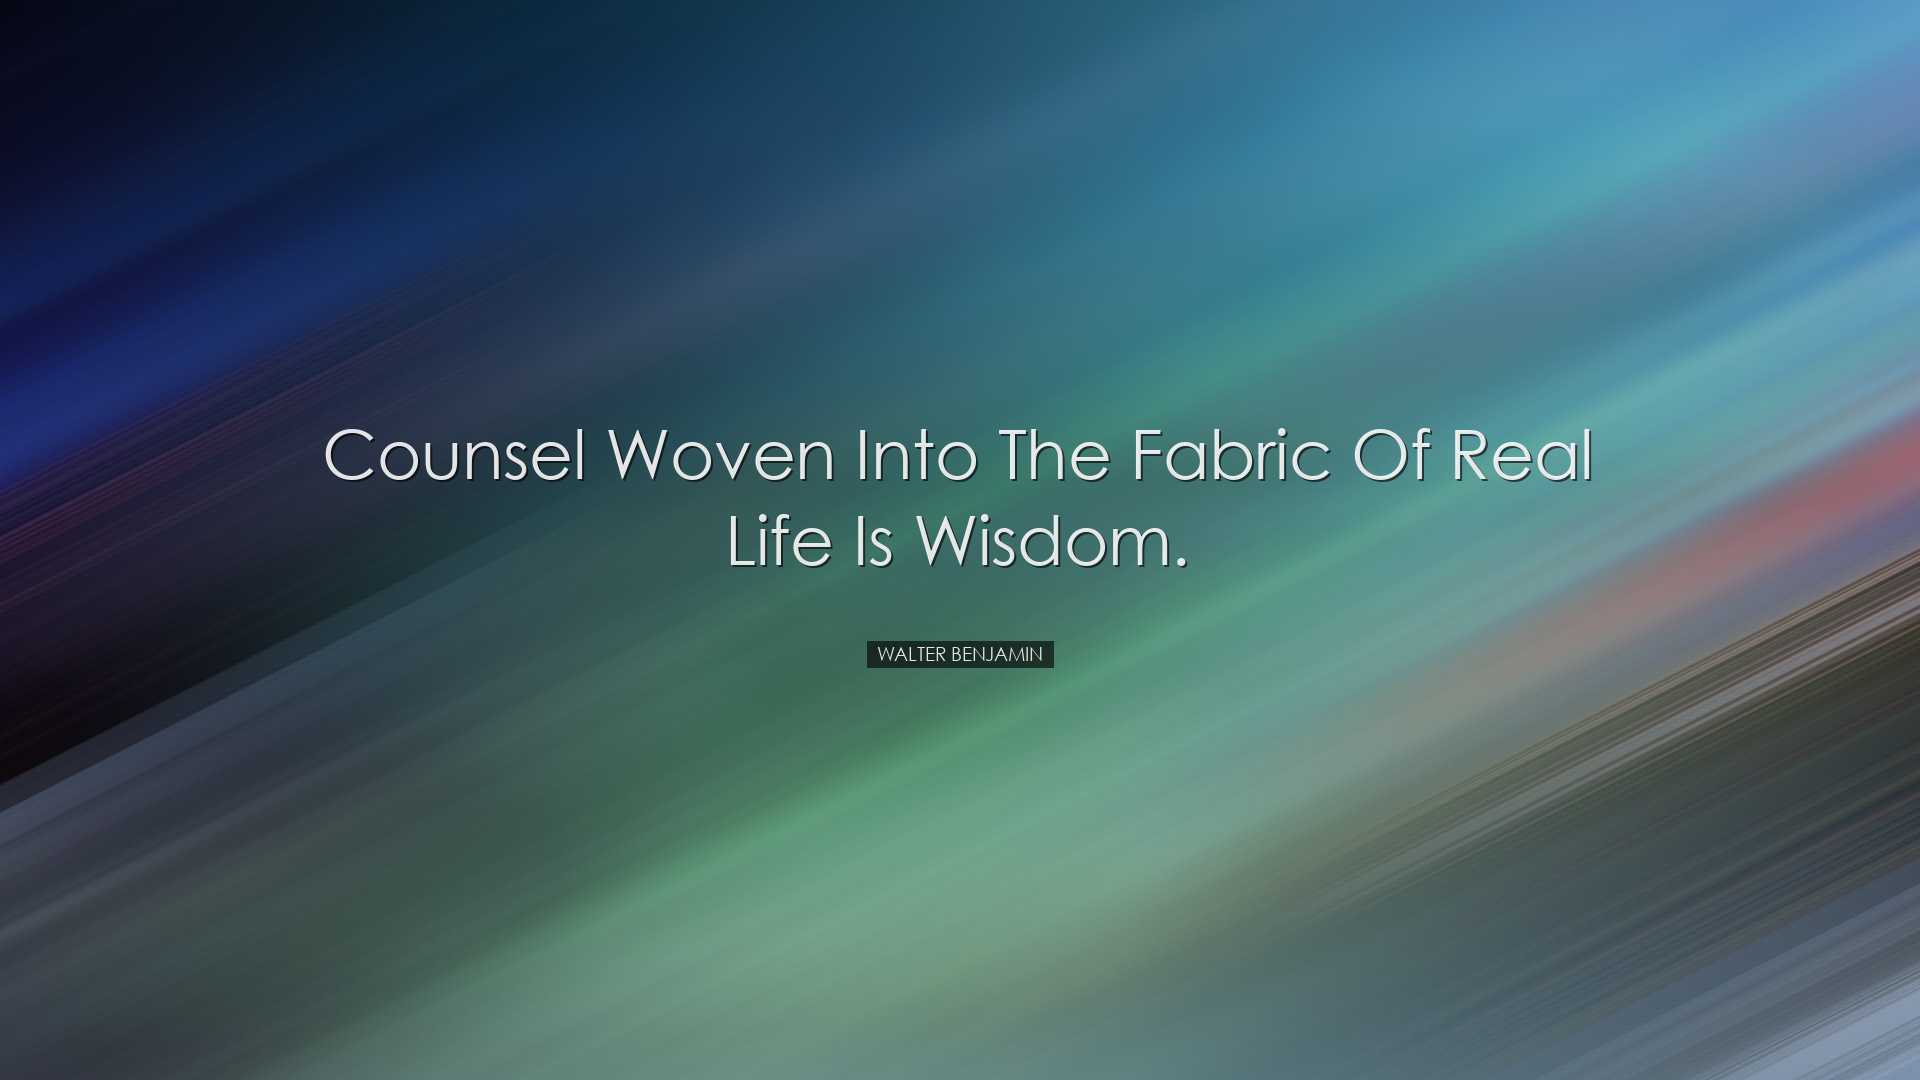 Counsel woven into the fabric of real life is wisdom. - Walter Ben